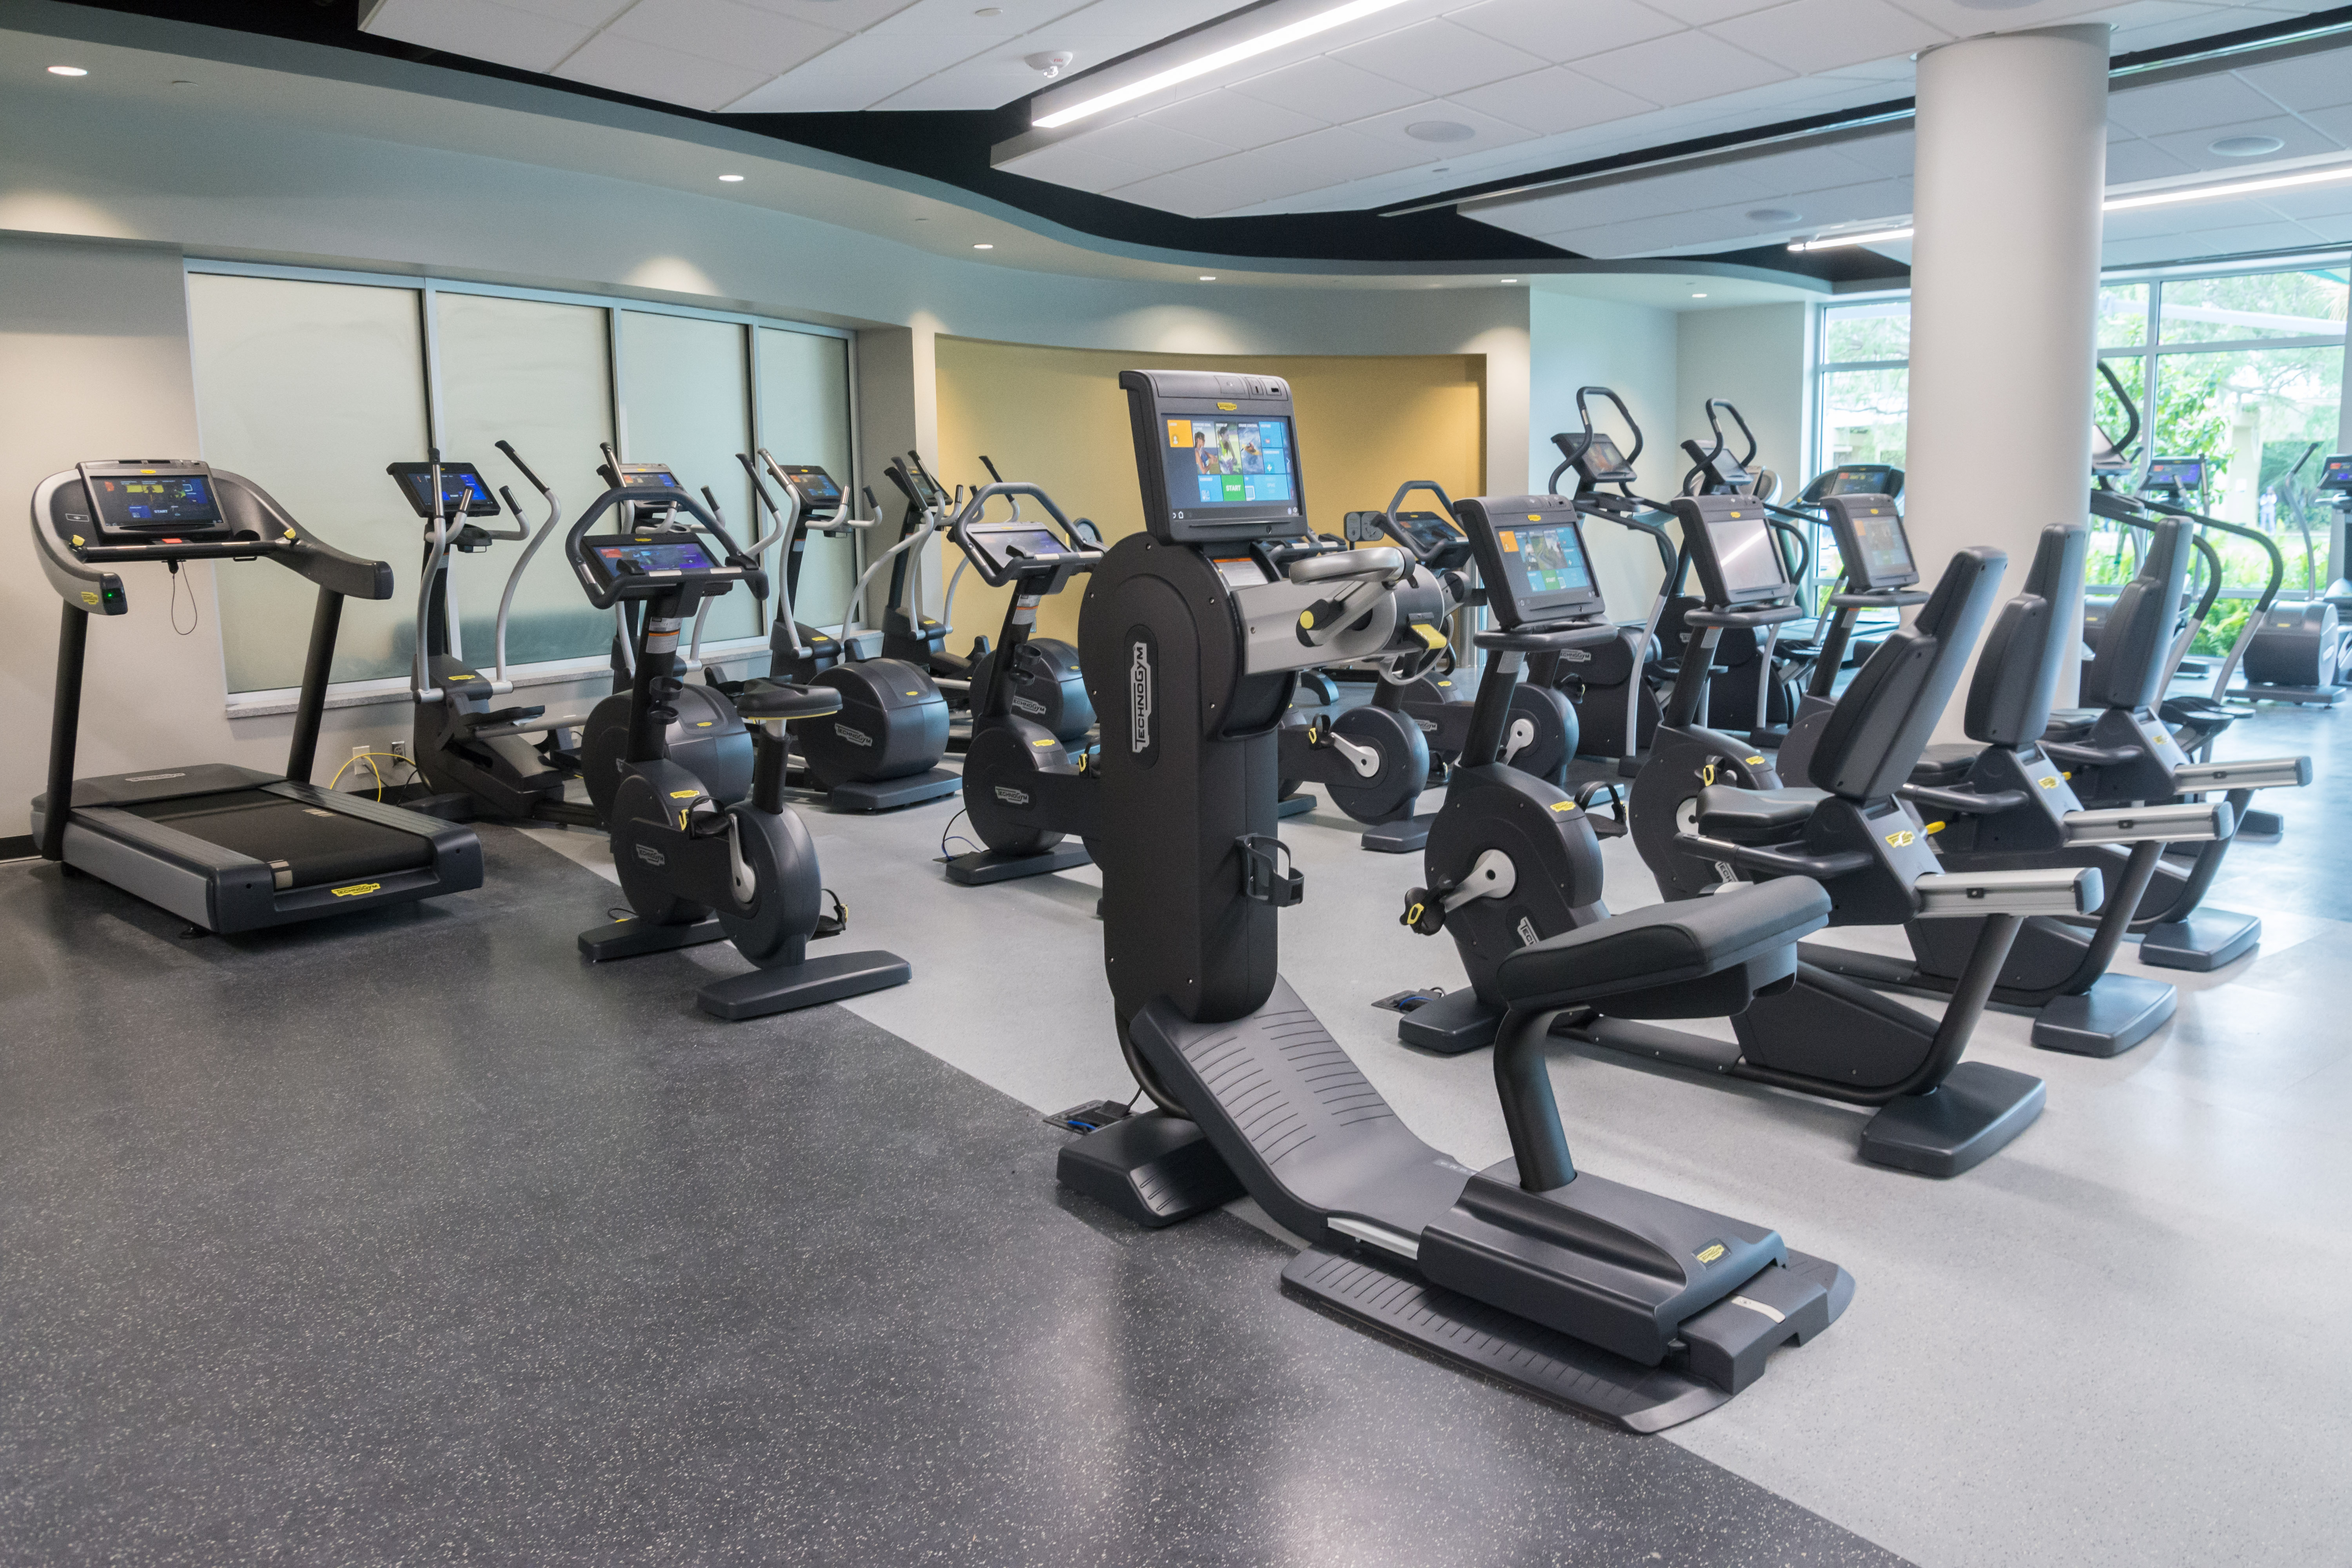 The WELL Fitness Center